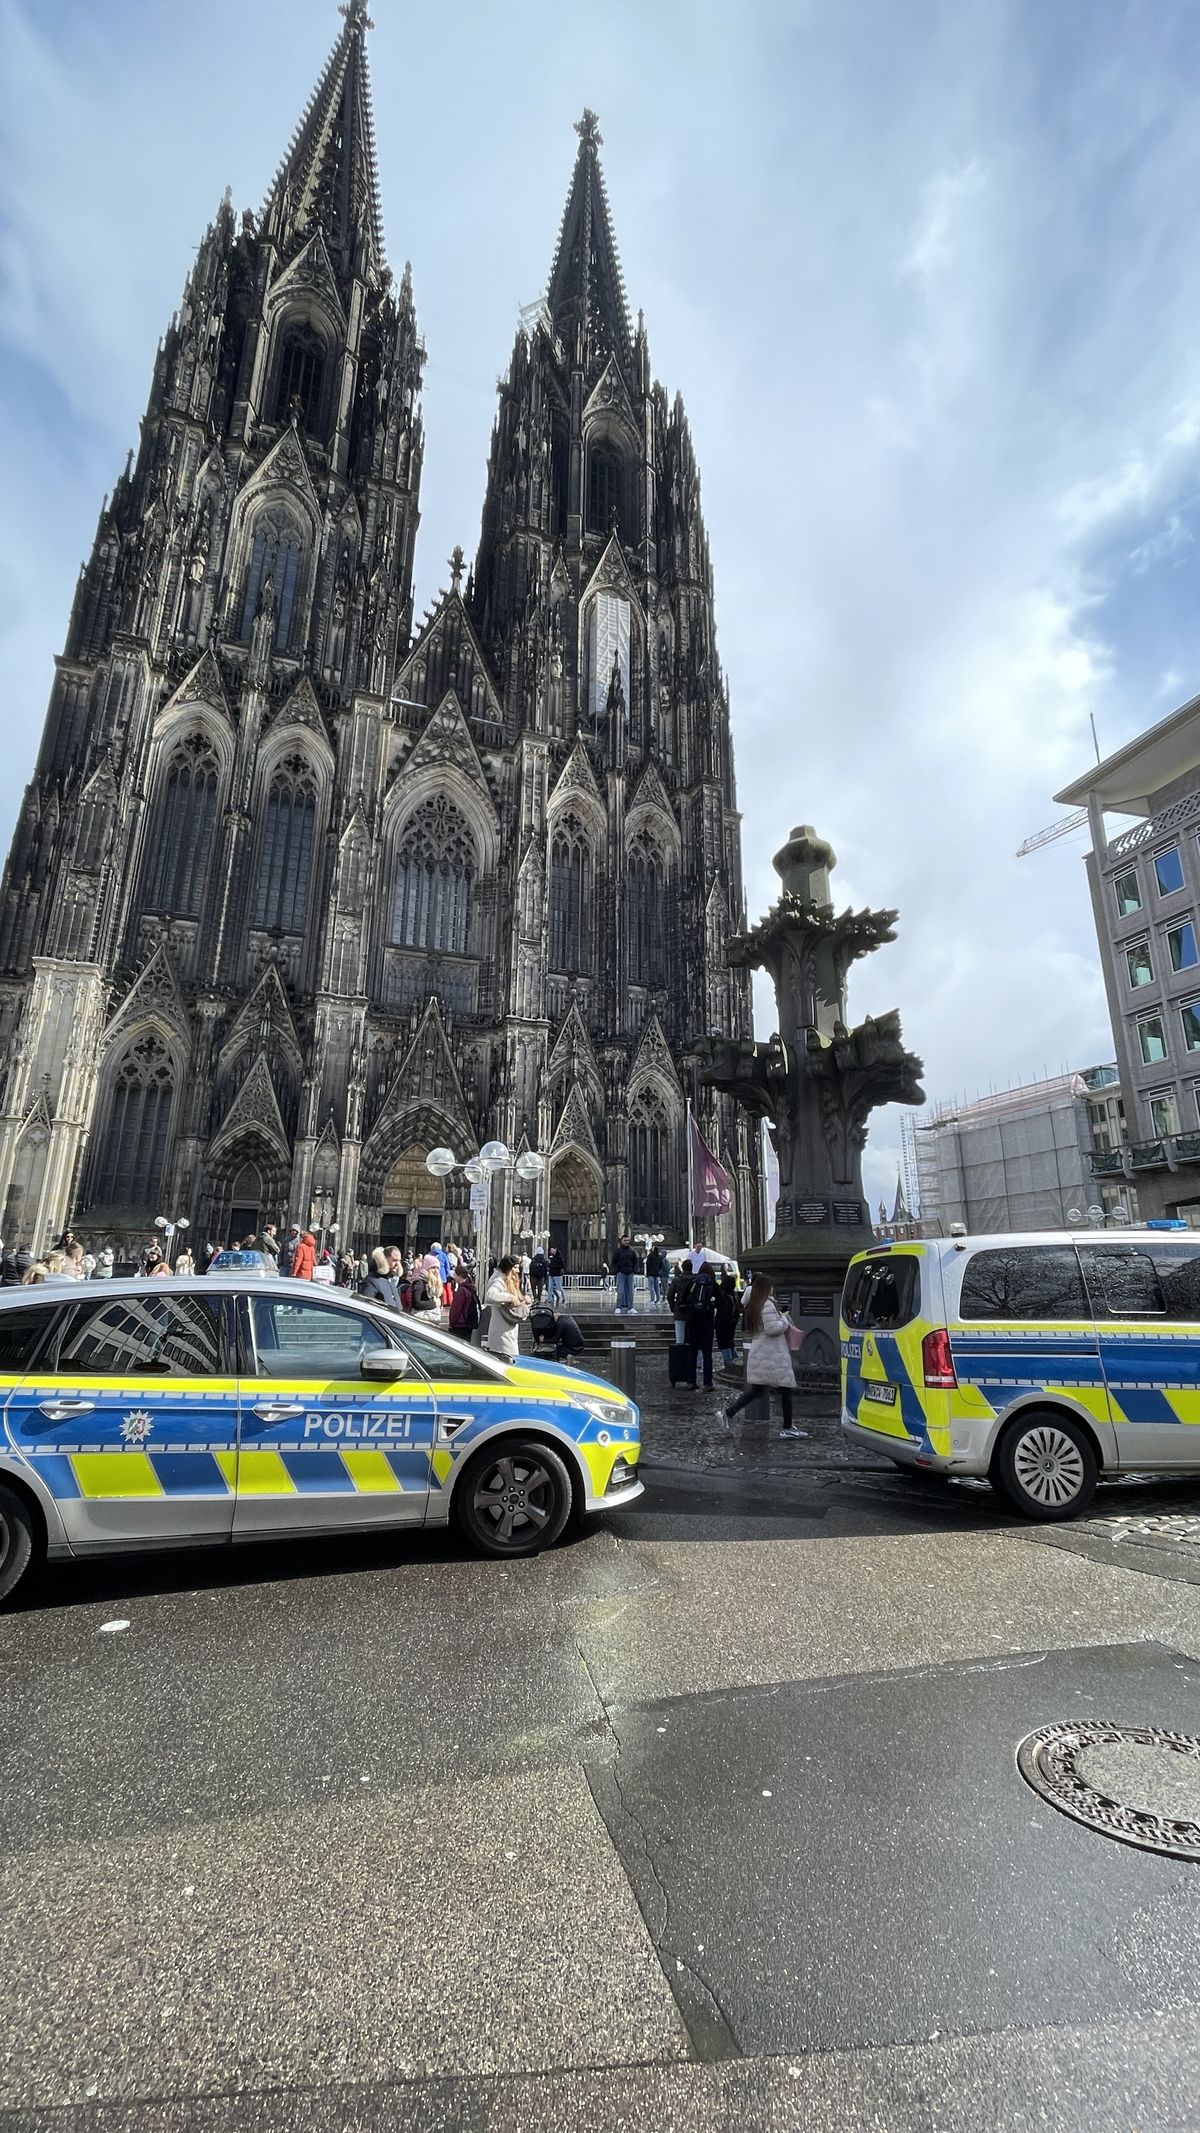 Activists scale Cologne Cathedral scaffolding, unfurl banners